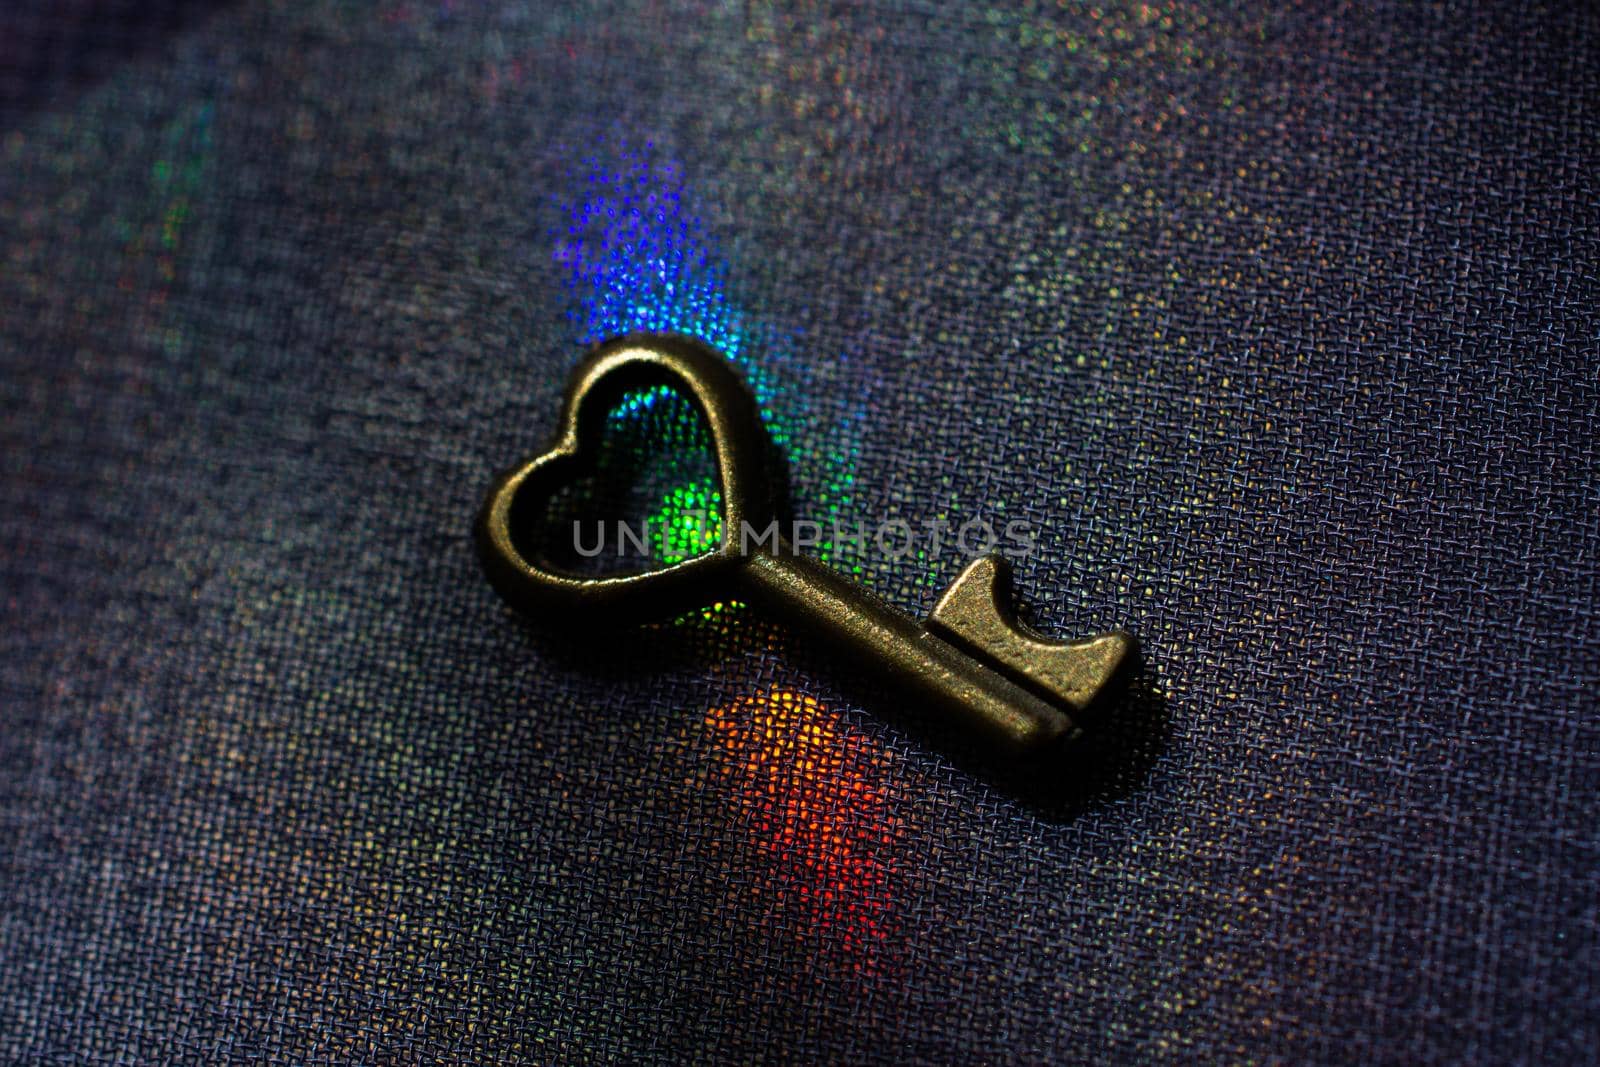 Vintage key. .Antique key. Retro key with a heart shape on  on colorful fabric  by berkay